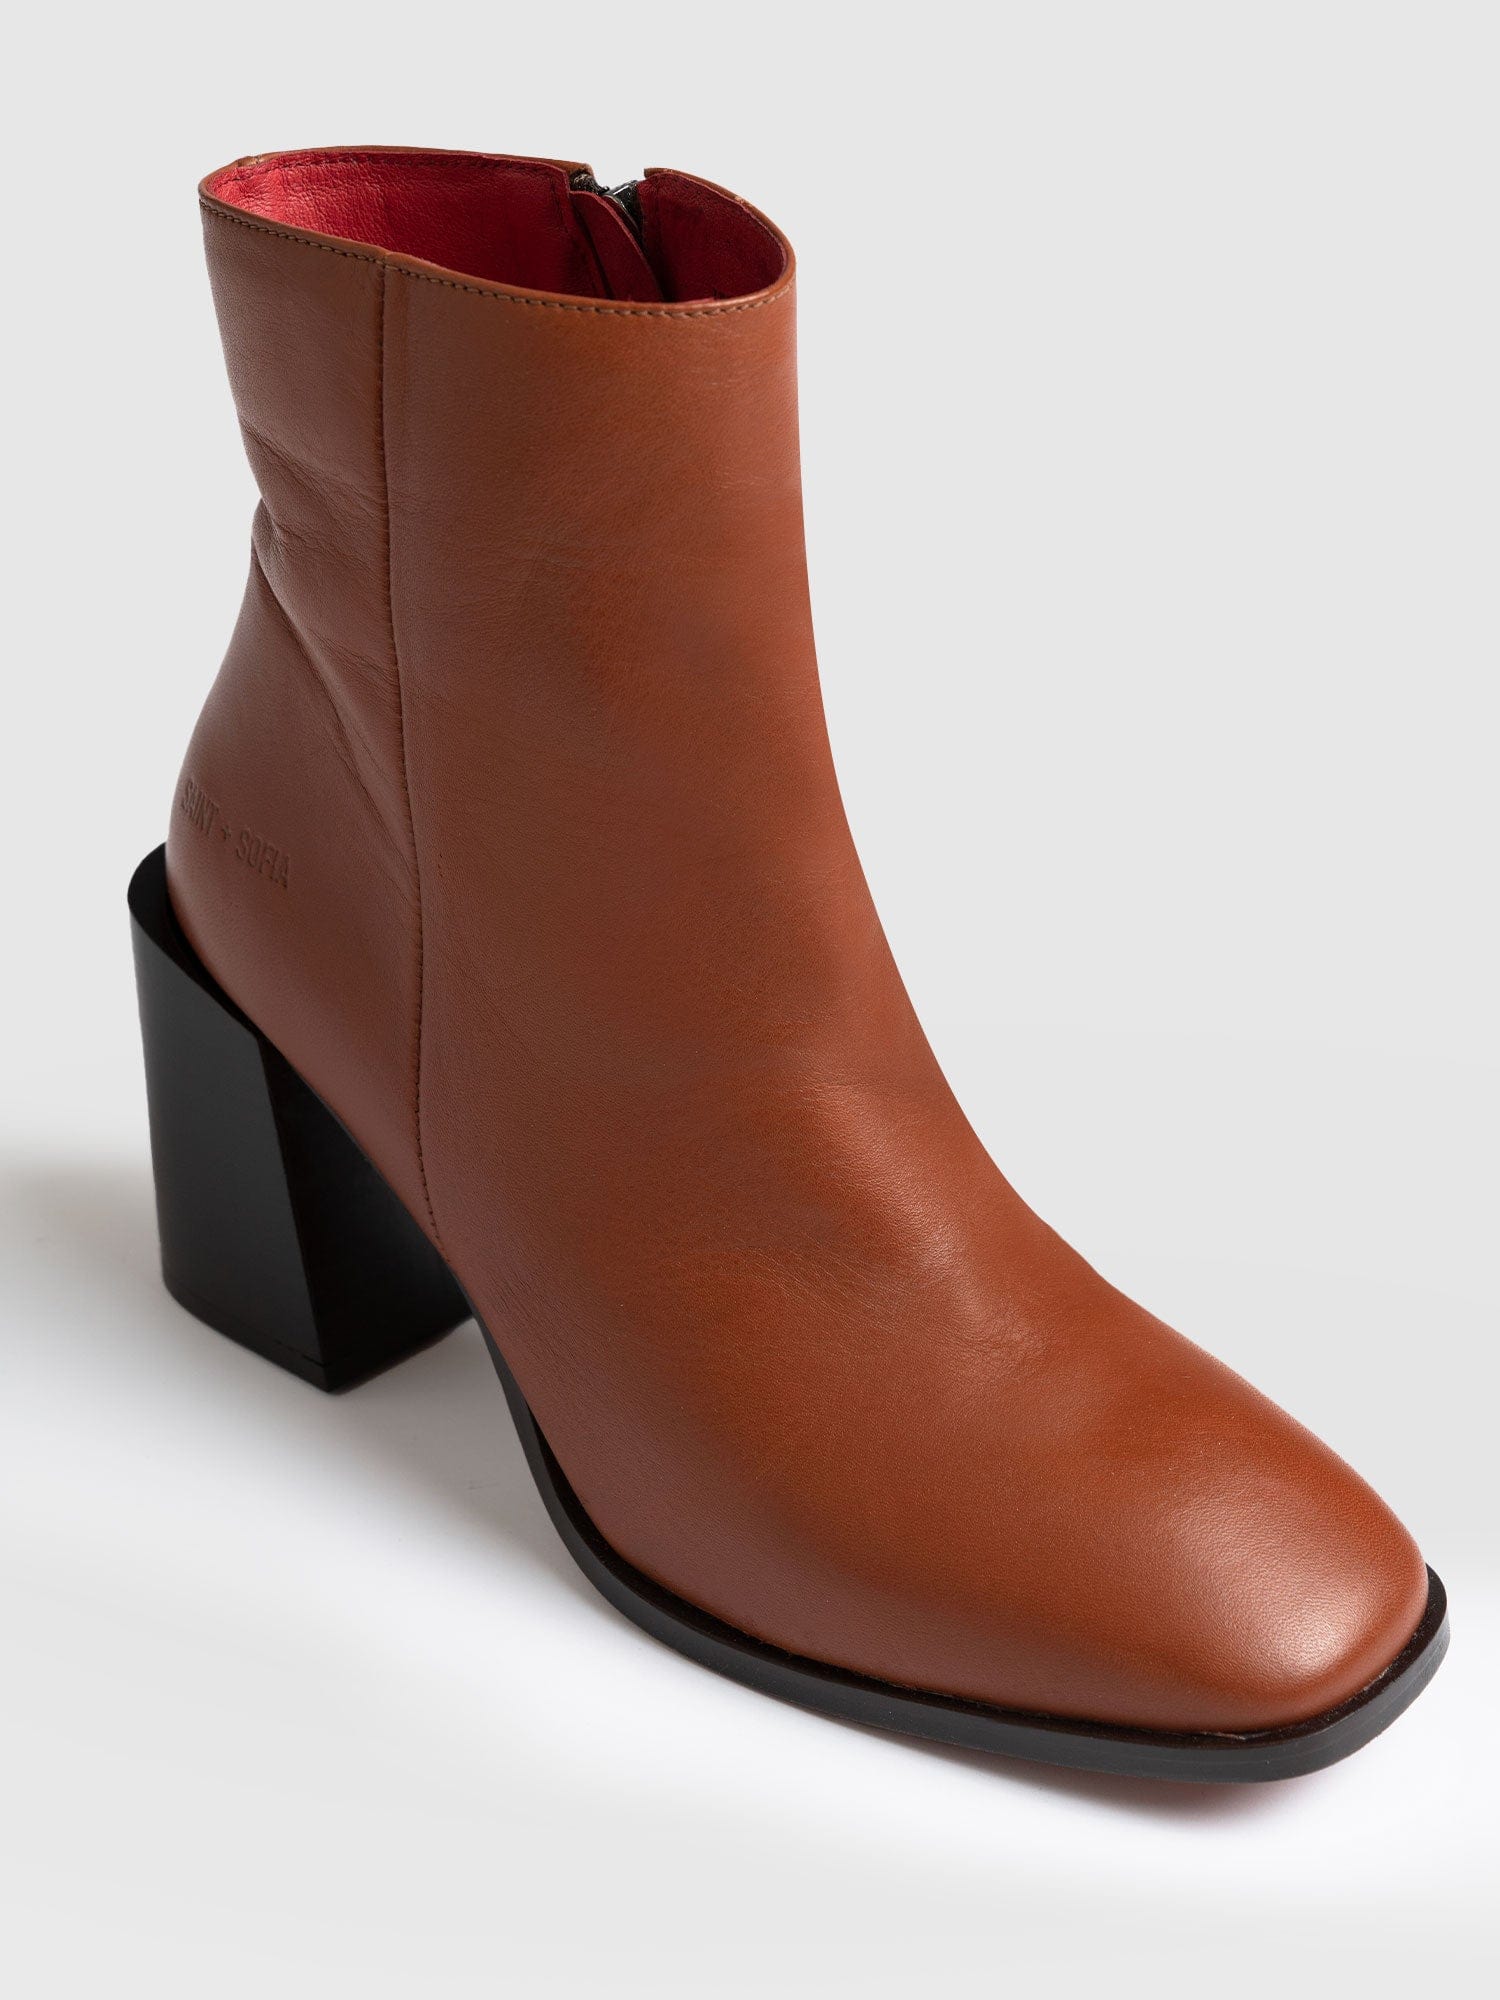 Boots | Low Heel Knee High Boots | Oasis | Womens brown leather ankle boots,  Ankle boots uk, Brown leather ankle boots